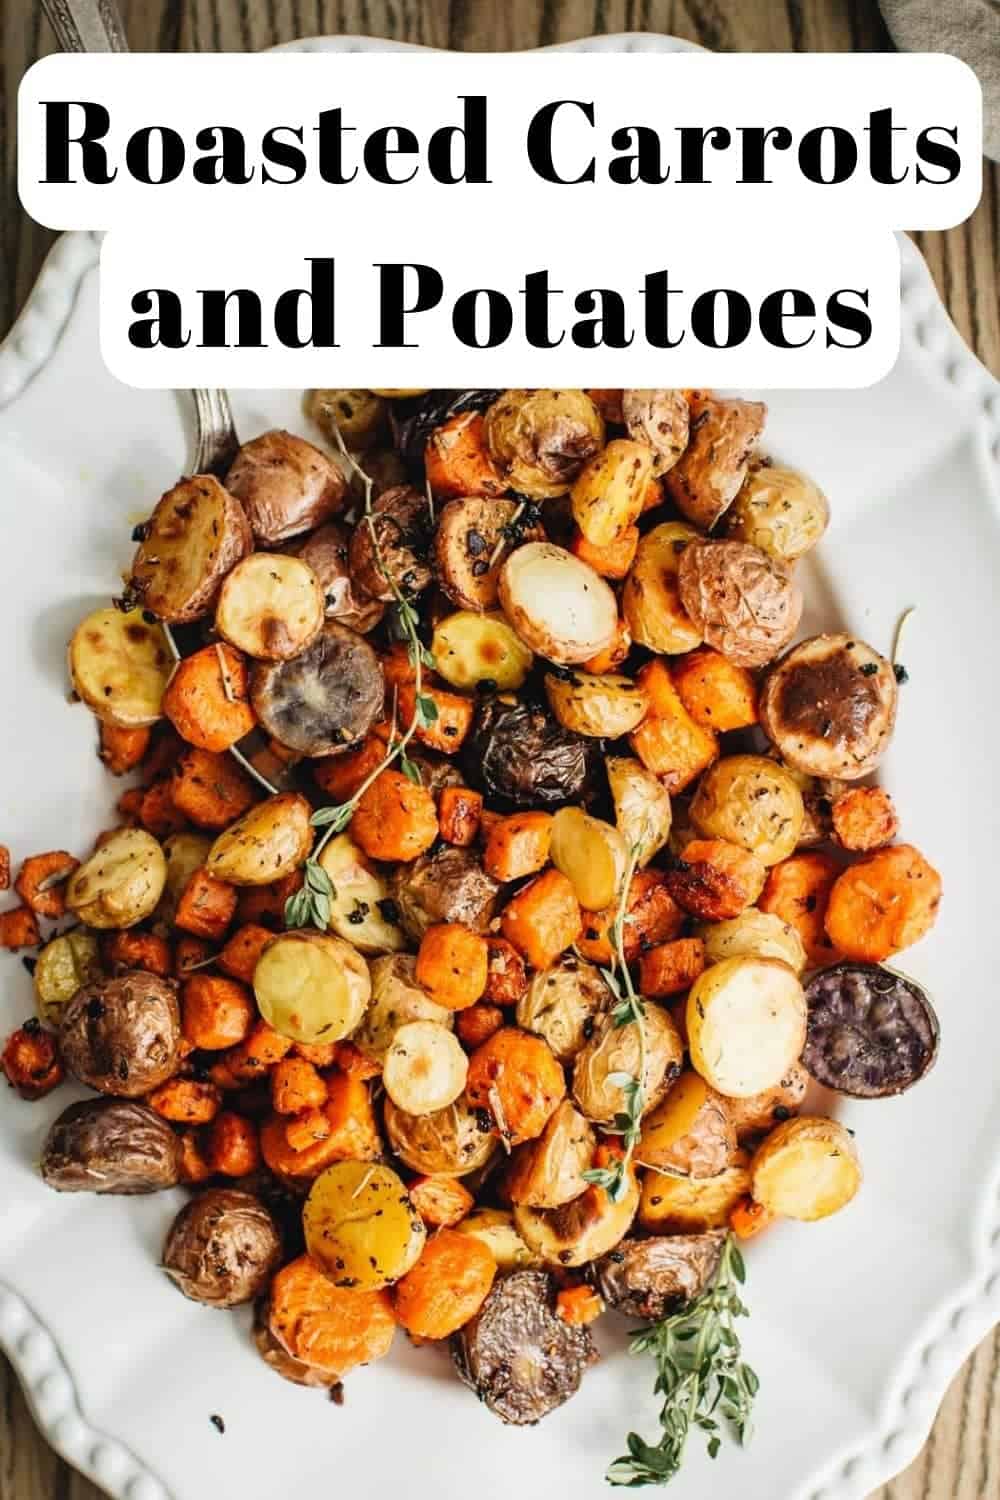 Roasted carrots and potatoes on a white platter.